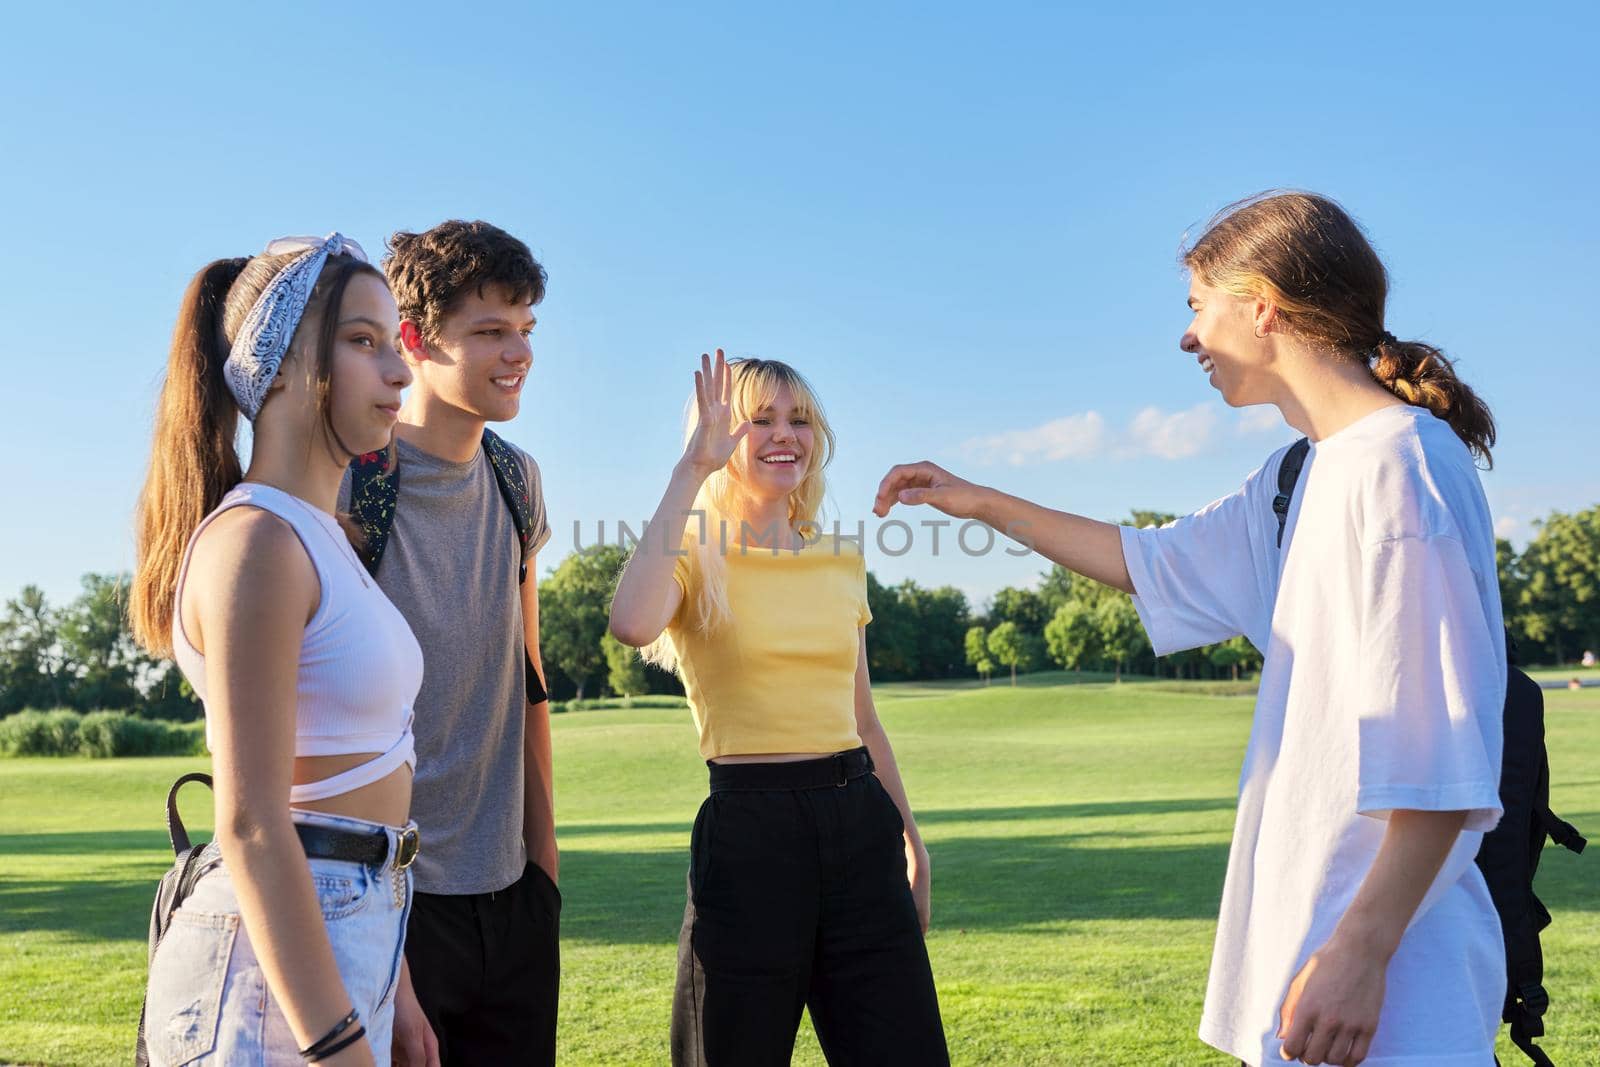 Meeting of teenage friends. Group of cheerful happy teenagers walking along road on sunny summer day. Adolescence, youth, friendship, young people concept